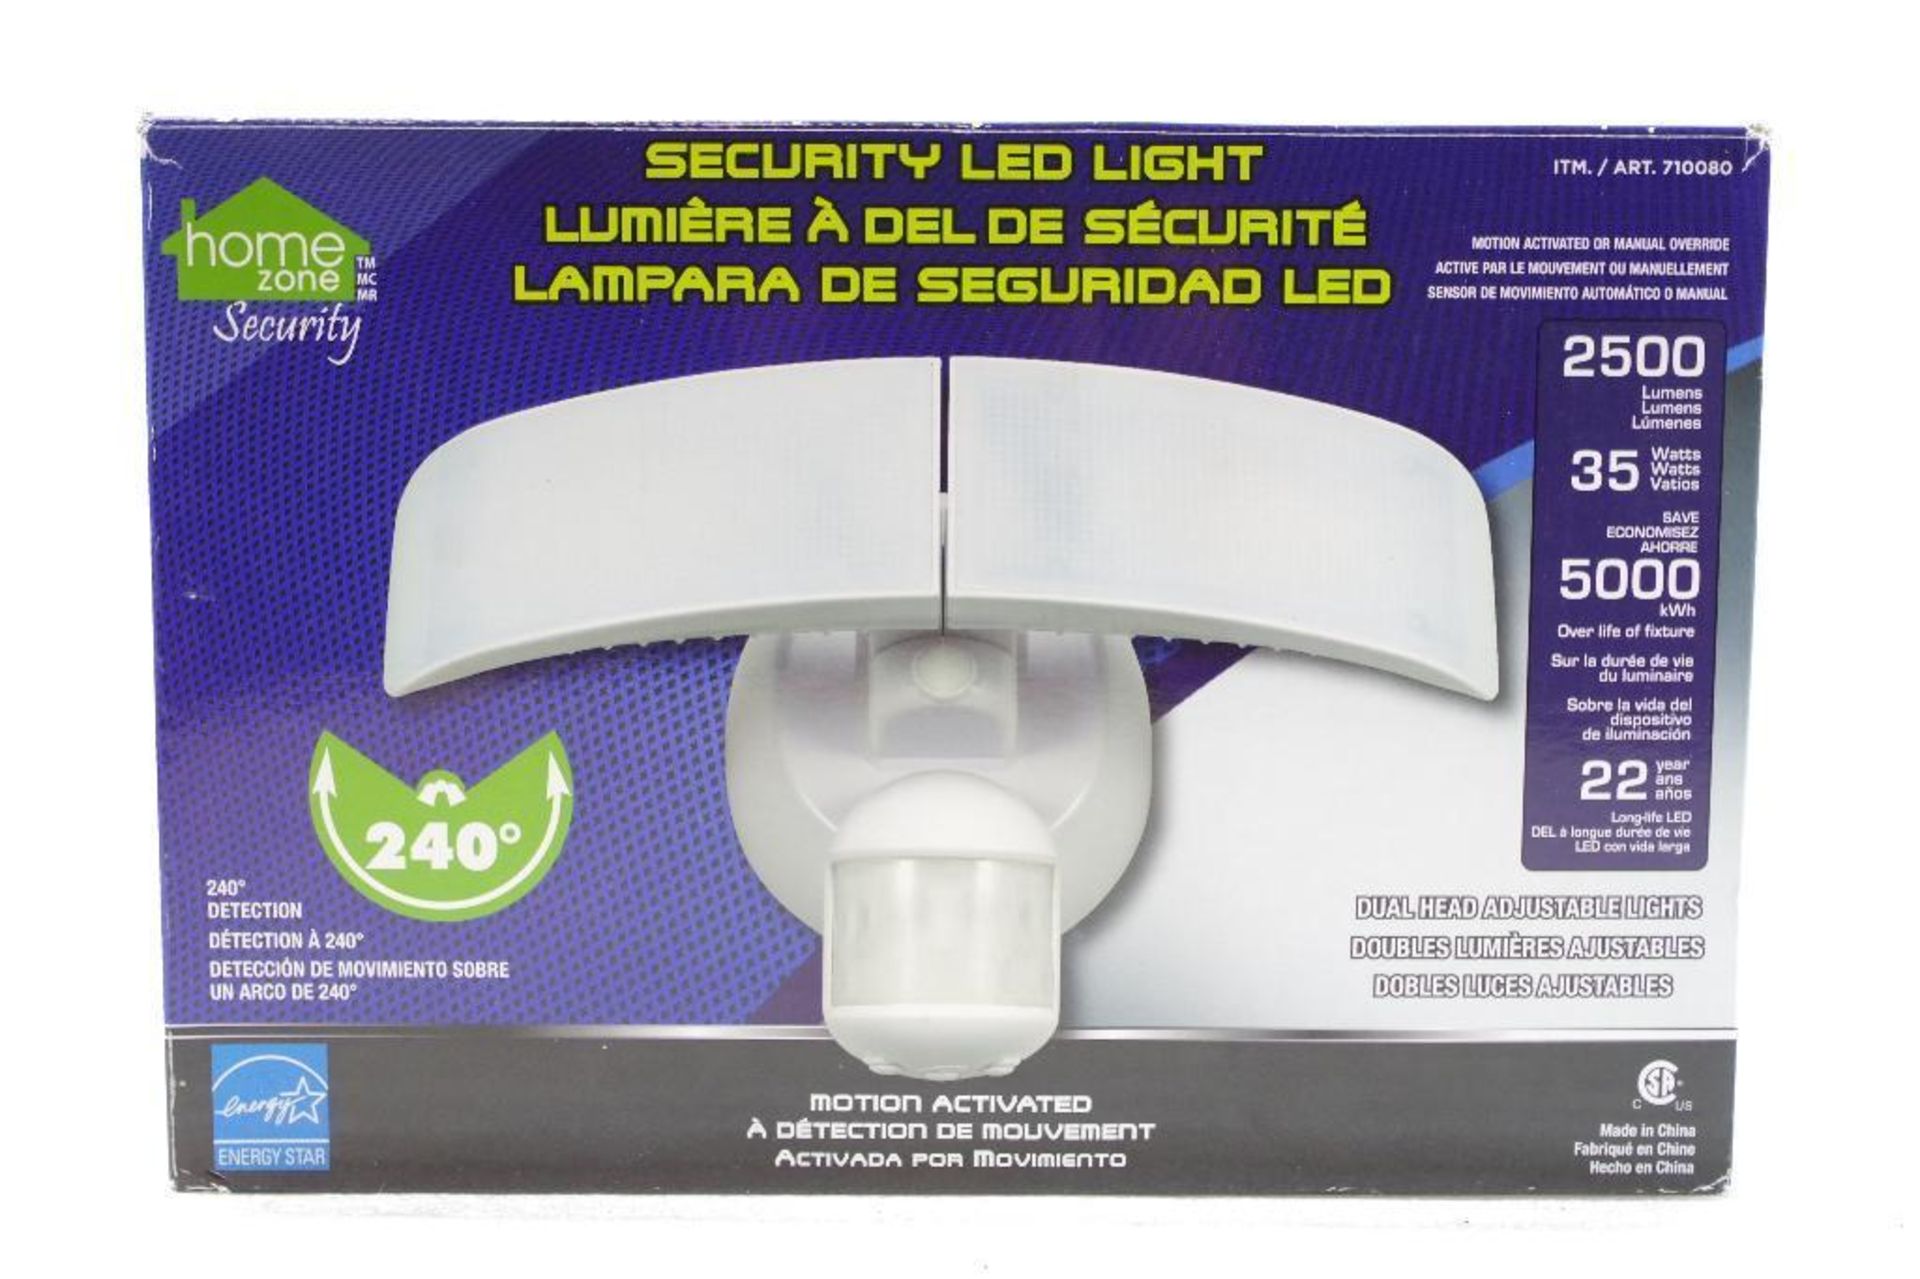 HOME ZONE 2500 Lumens Motion Activated Security LED Light